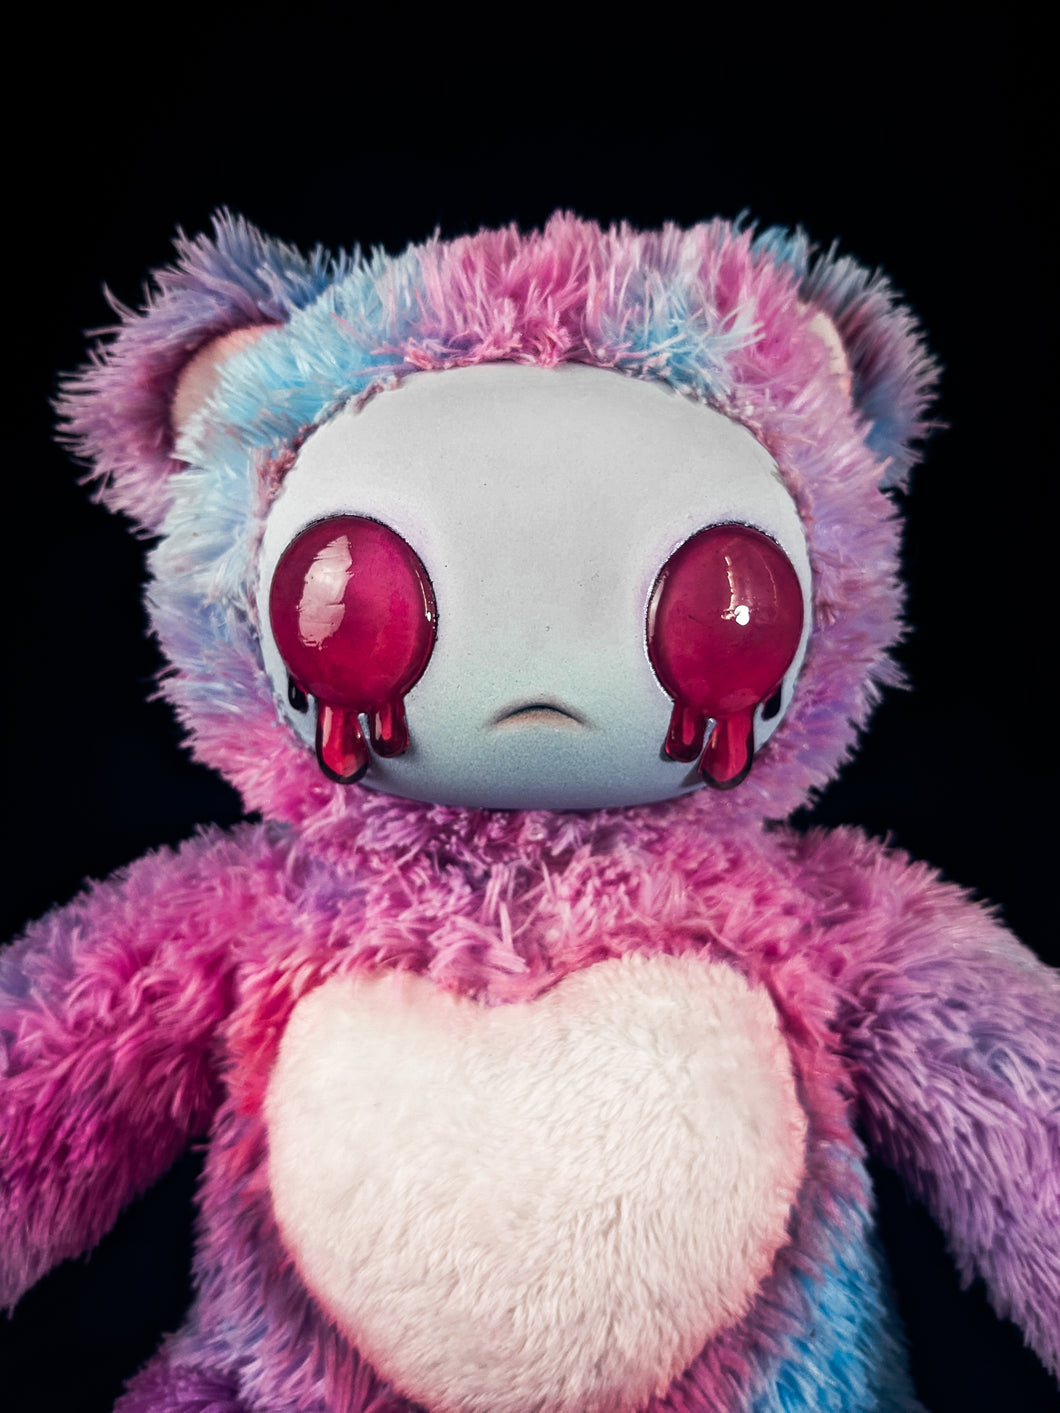 Candy Chaos: AZAZEL- CRYPTCRITS Handcrafted Pastel Crying Demon Art Doll Plush Toy for Eccentric Souls